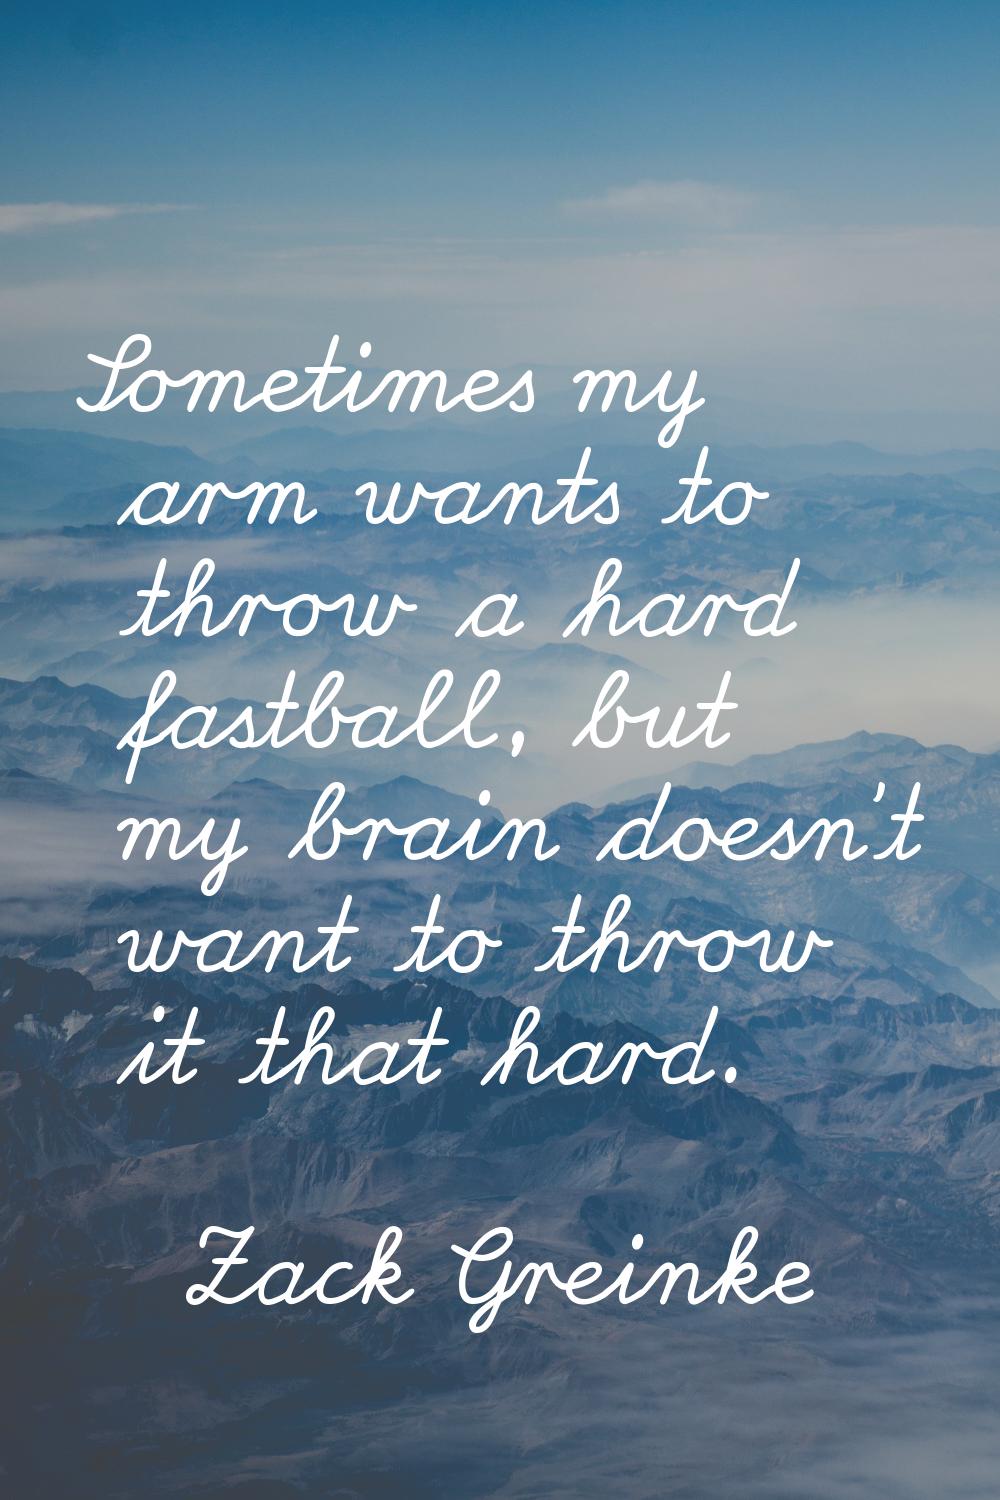 Sometimes my arm wants to throw a hard fastball, but my brain doesn't want to throw it that hard.